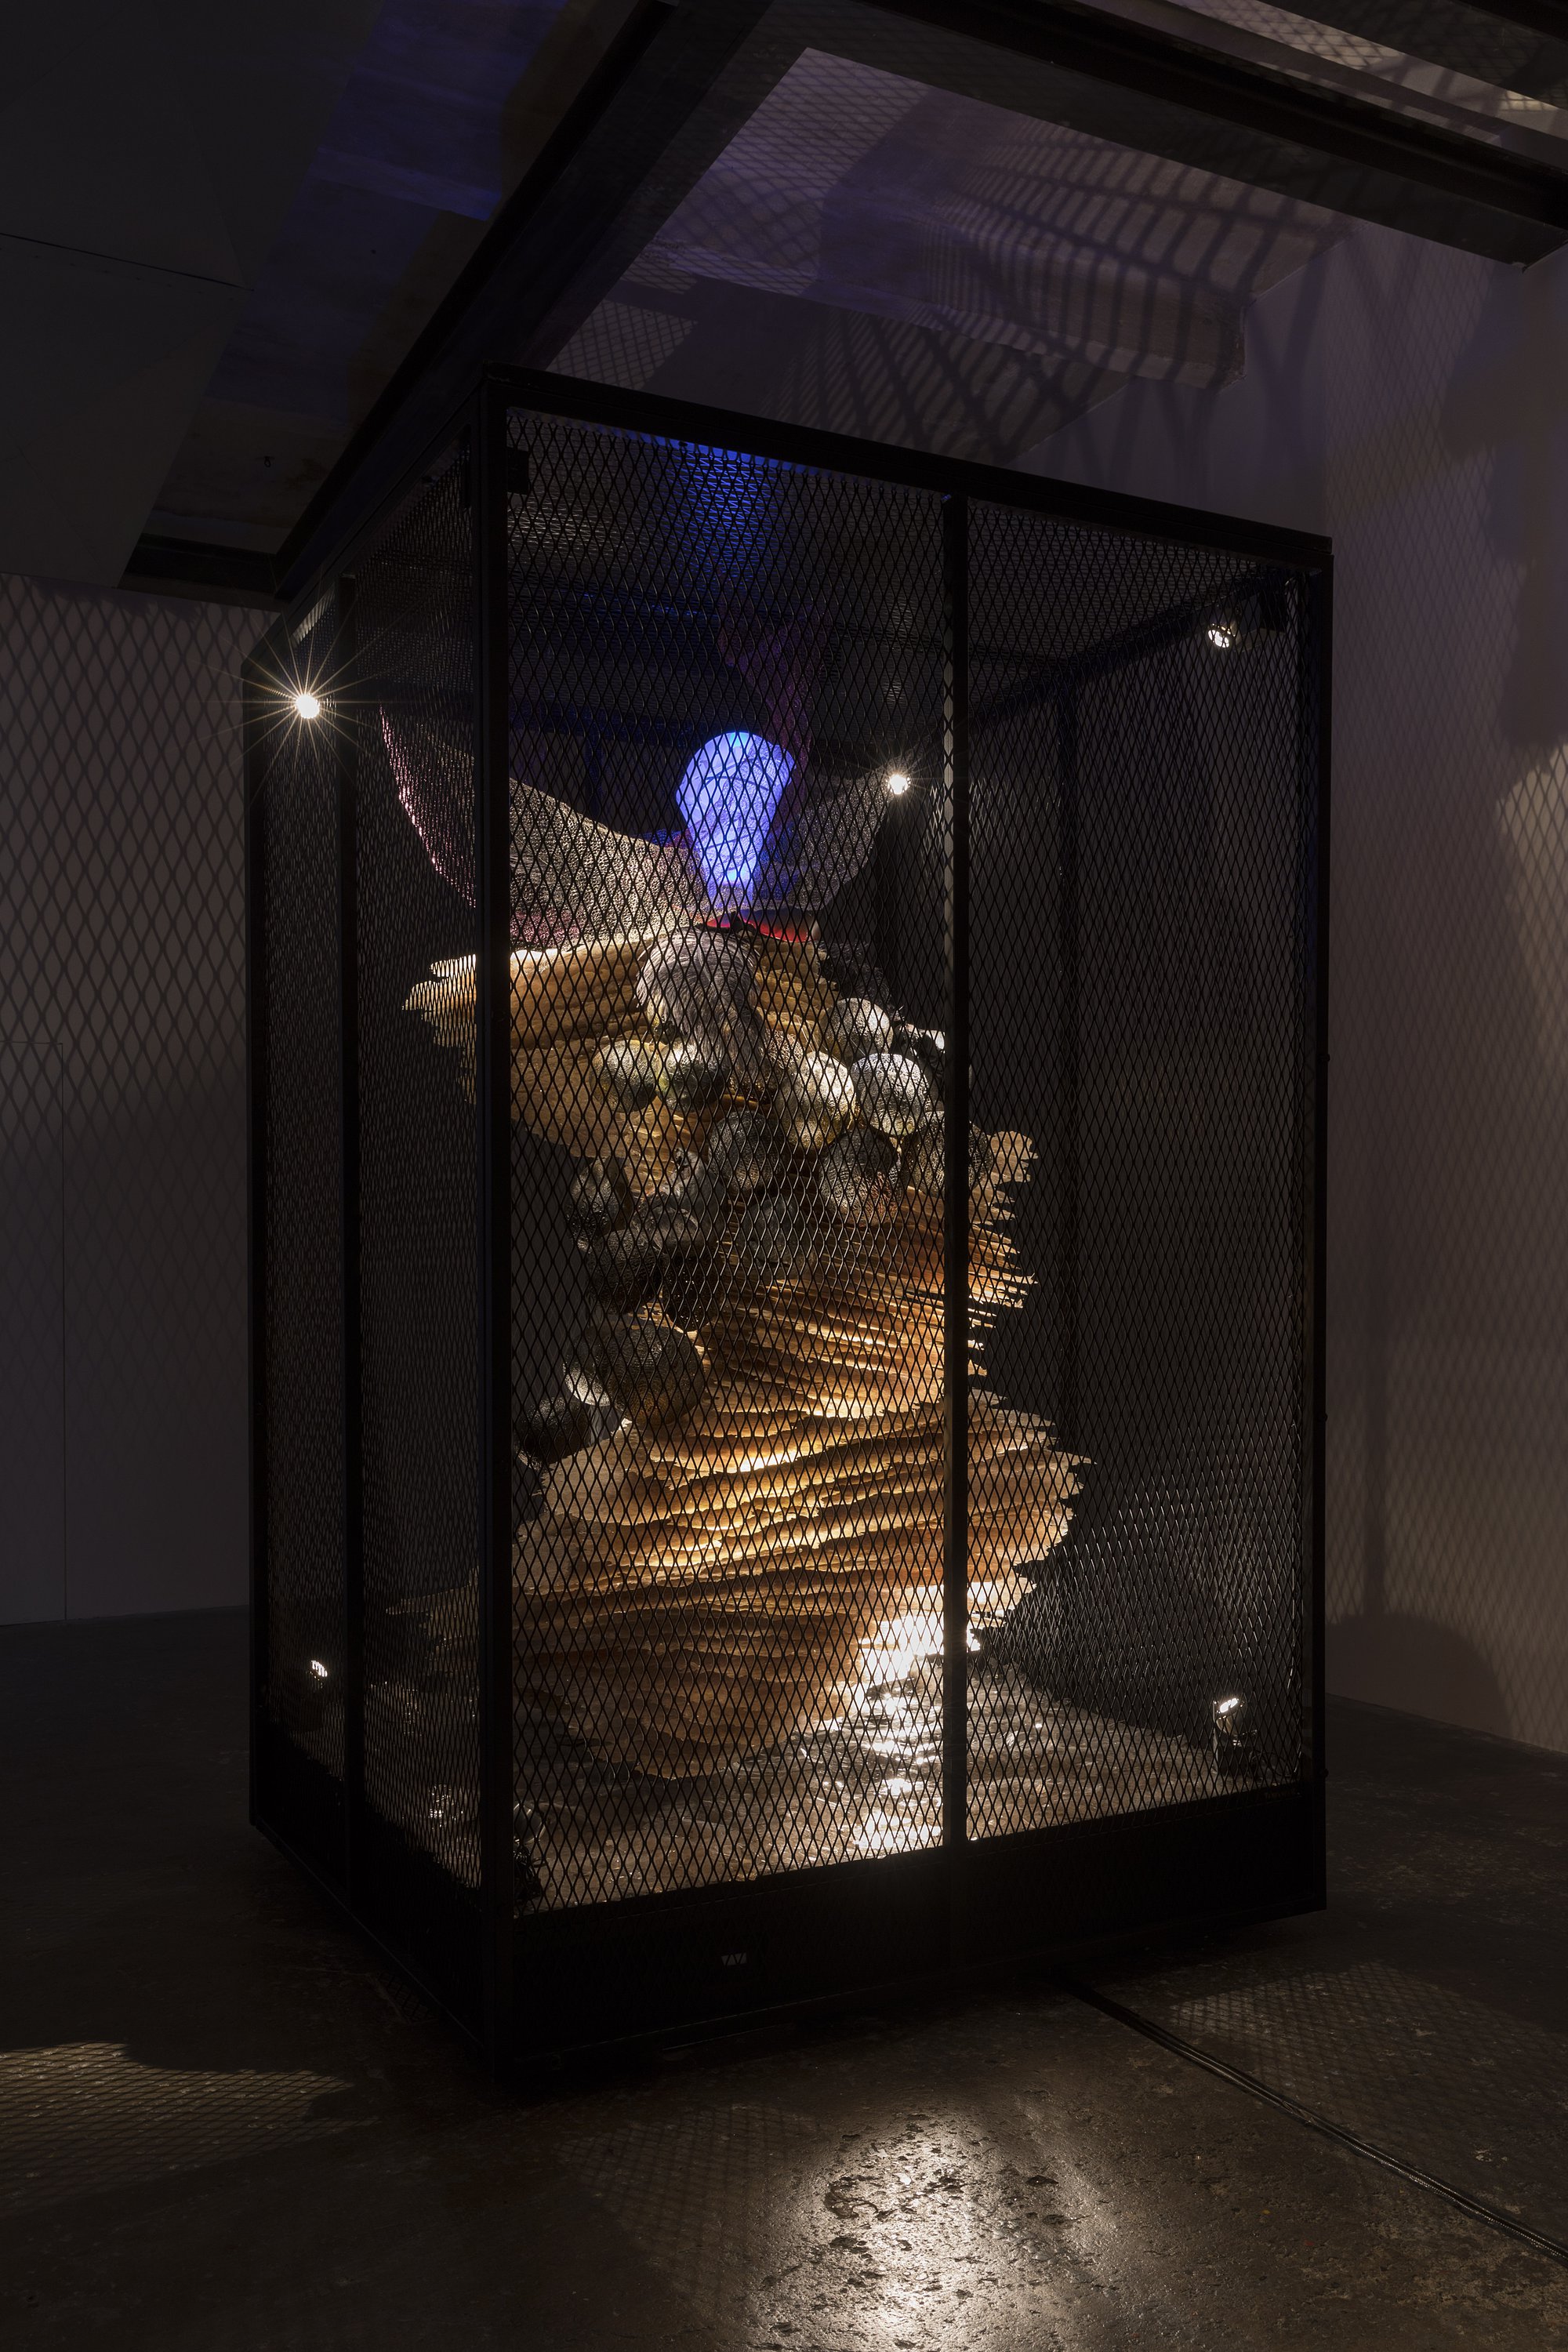 Liliane Lijn, The Bride, mixed media performing sculpture, steel mesh cage, blown glass, epoxy bonded mica, ostrich feathers, lacquered papier-mâché balls, crocheted stainless steel and enamelled copper, forged iron, 244 x 244 x 153 cm, 1988. Installation view, I AM SHE, Ordet, Milan, 2020